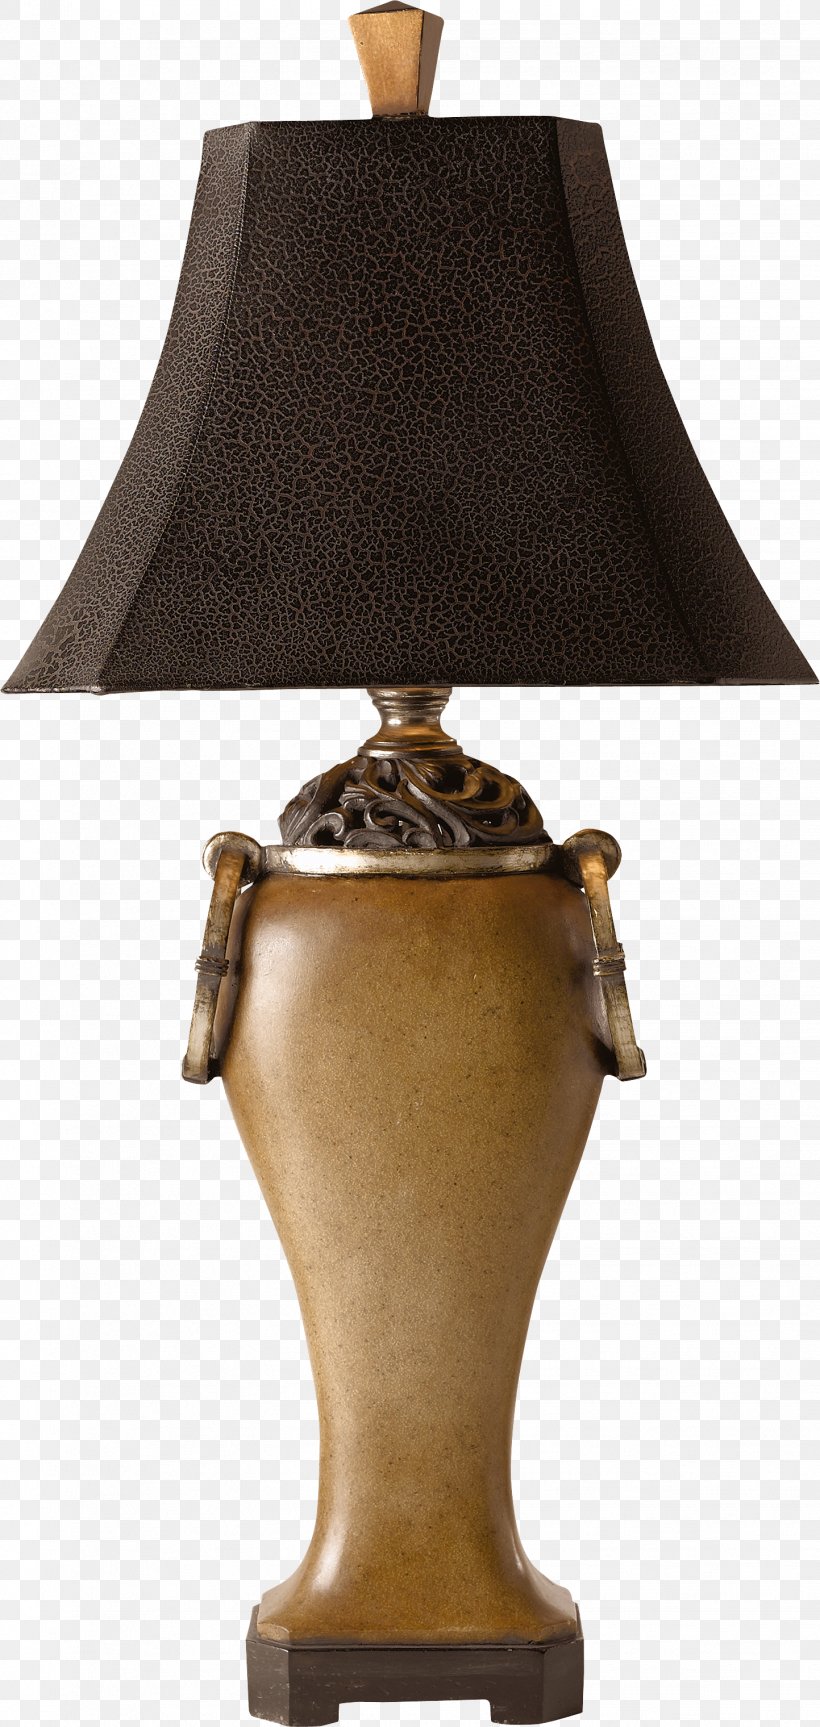 Lamp Shades Torchère Incandescent Light Bulb Street Light, PNG, 1443x3040px, Lamp Shades, Artifact, Ceramic, Furniture, Incandescent Light Bulb Download Free